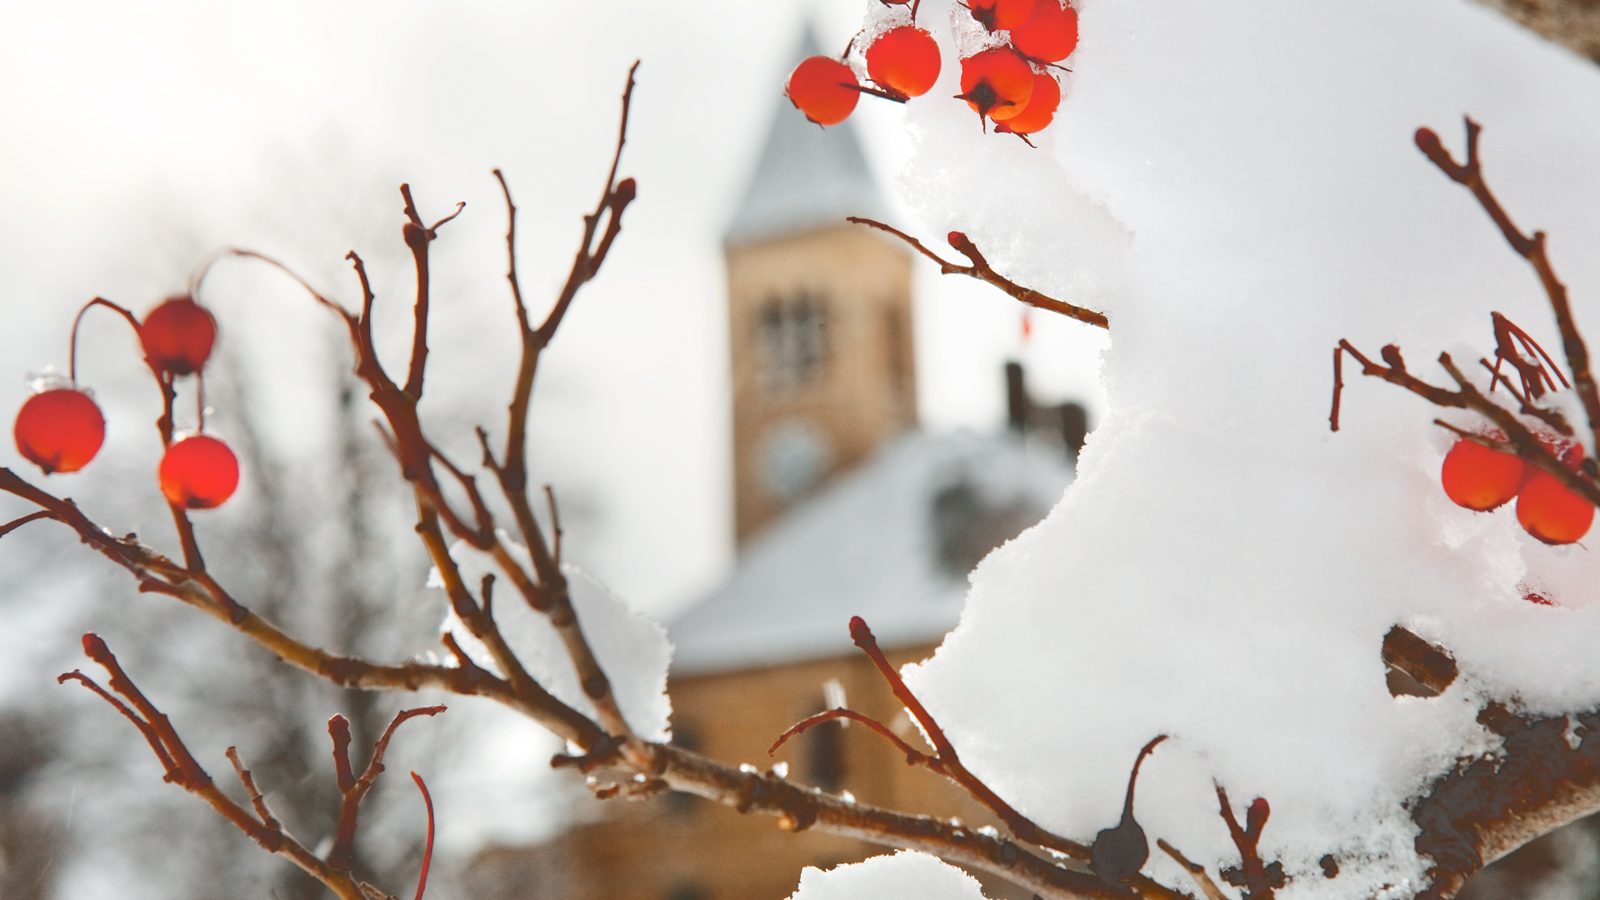 Photo of branches with snow and red berries in the foreground; a blurry McGraw Tower in the background.